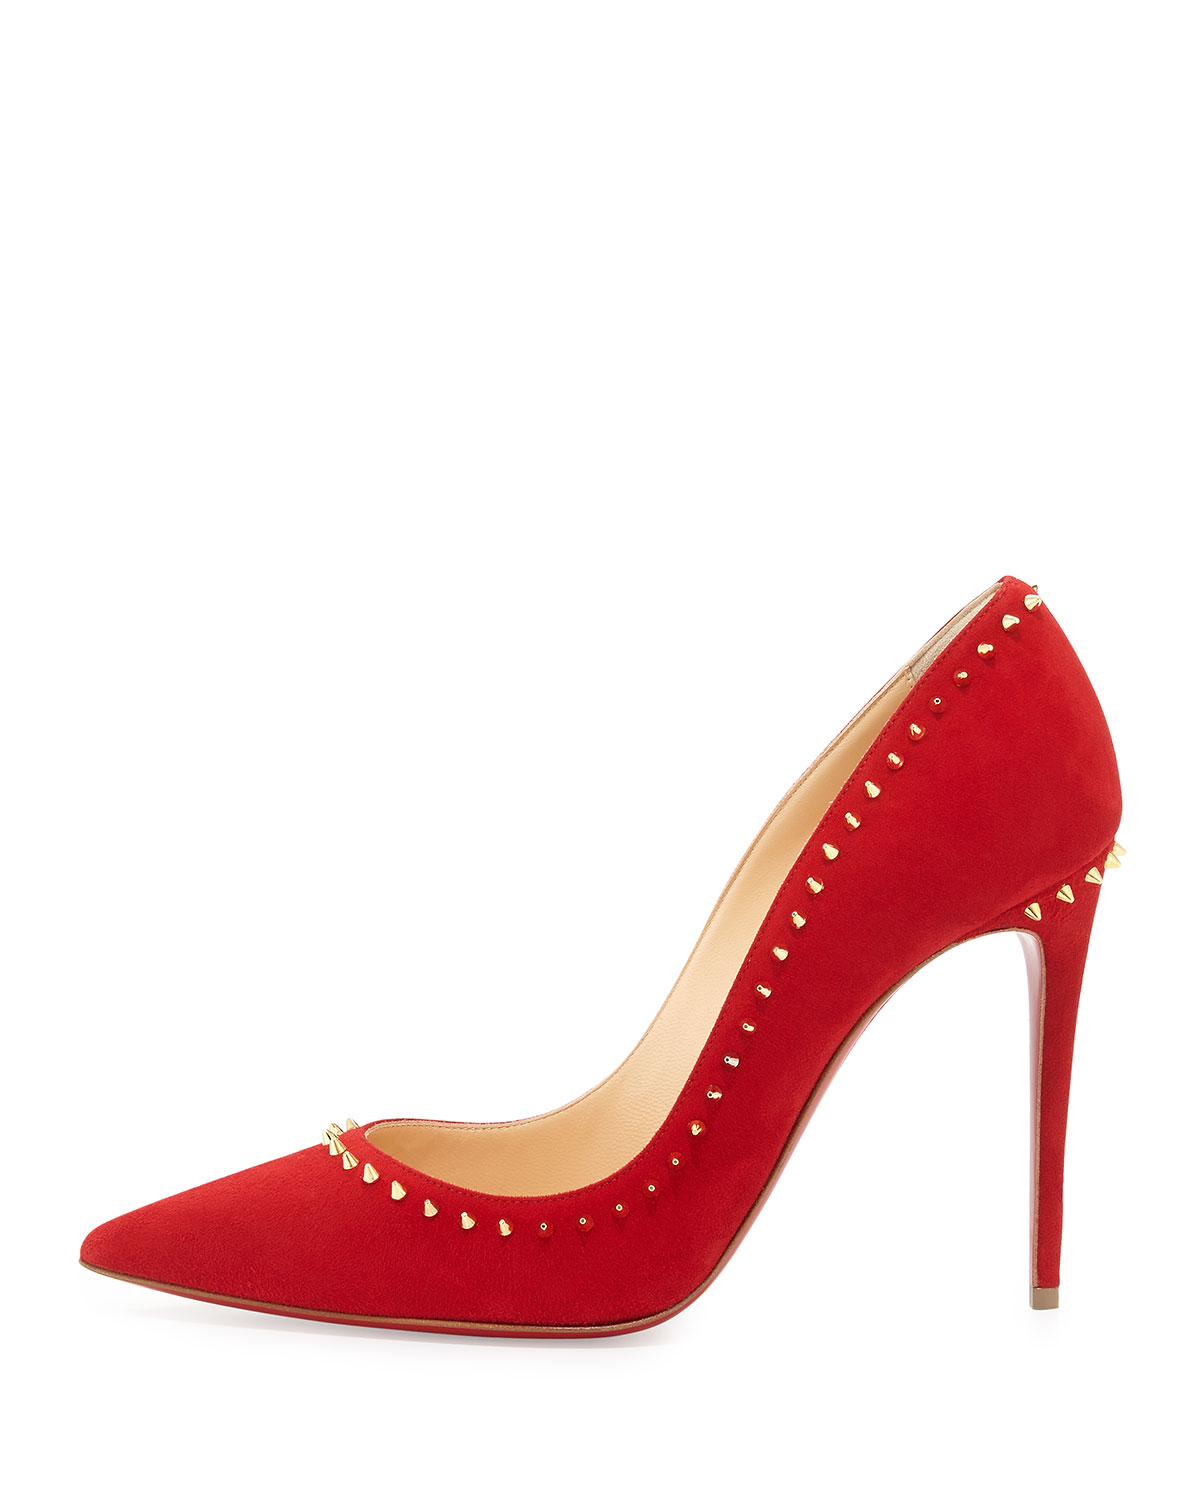 christian louboutin red and gold spiked heels